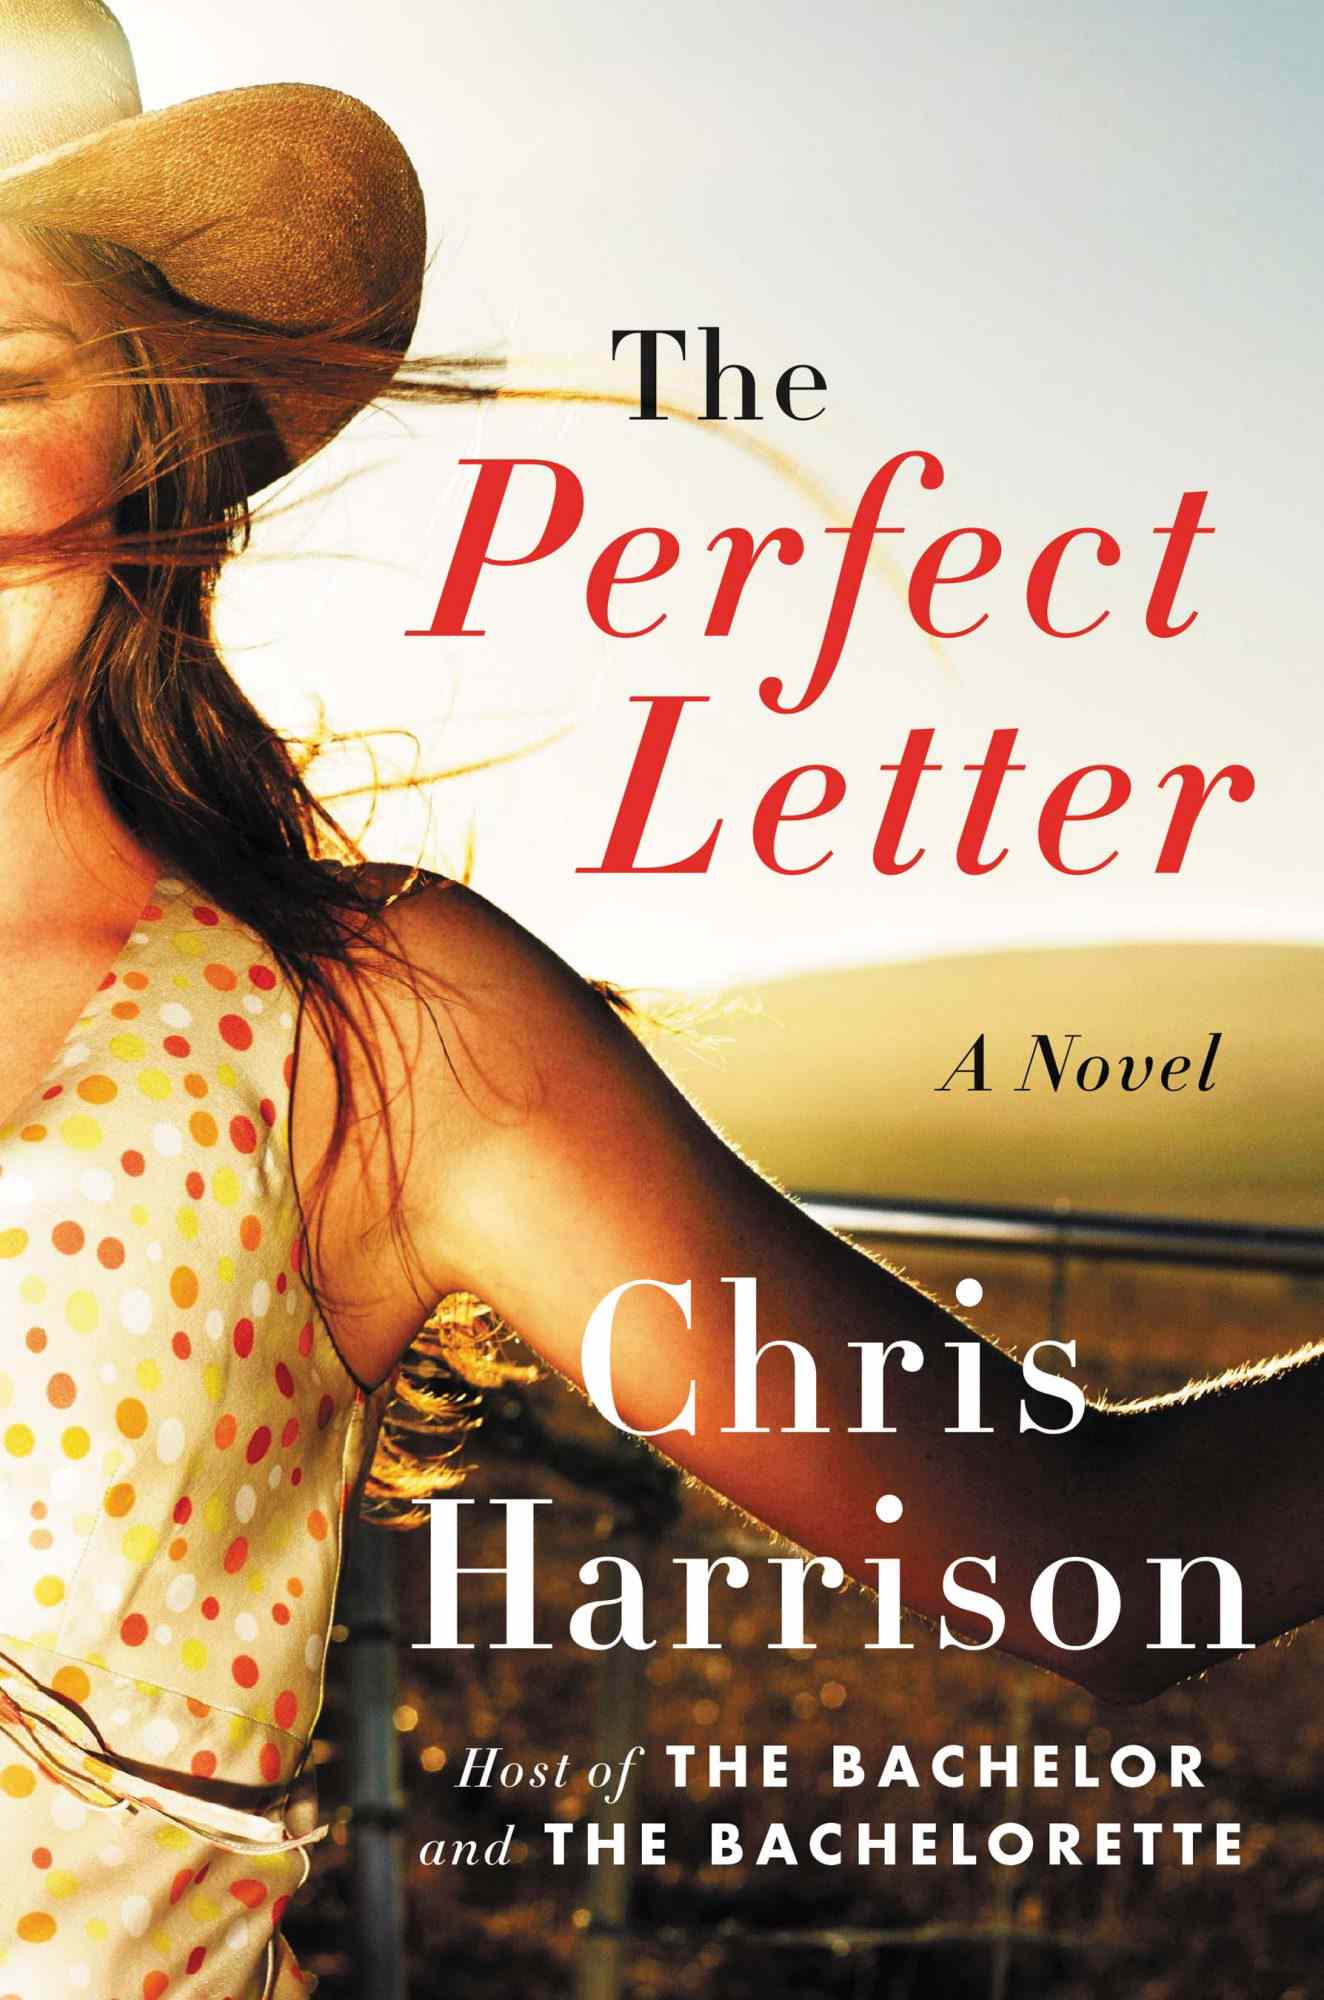 The Perfect Letter by Chris Harrison